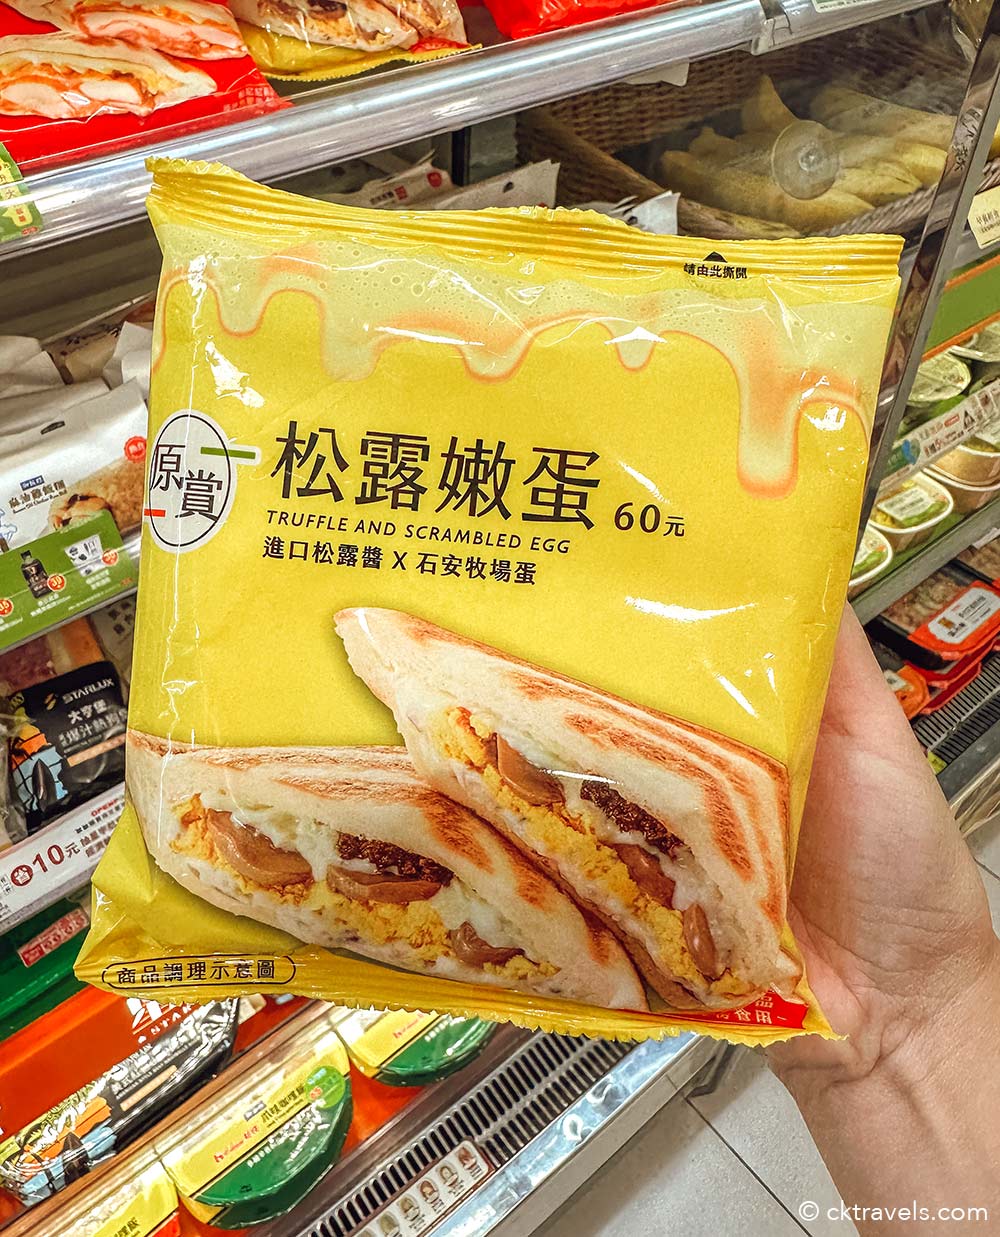 Scrambled egg and truffle toasted sandwich at Taiwan 7-Eleven